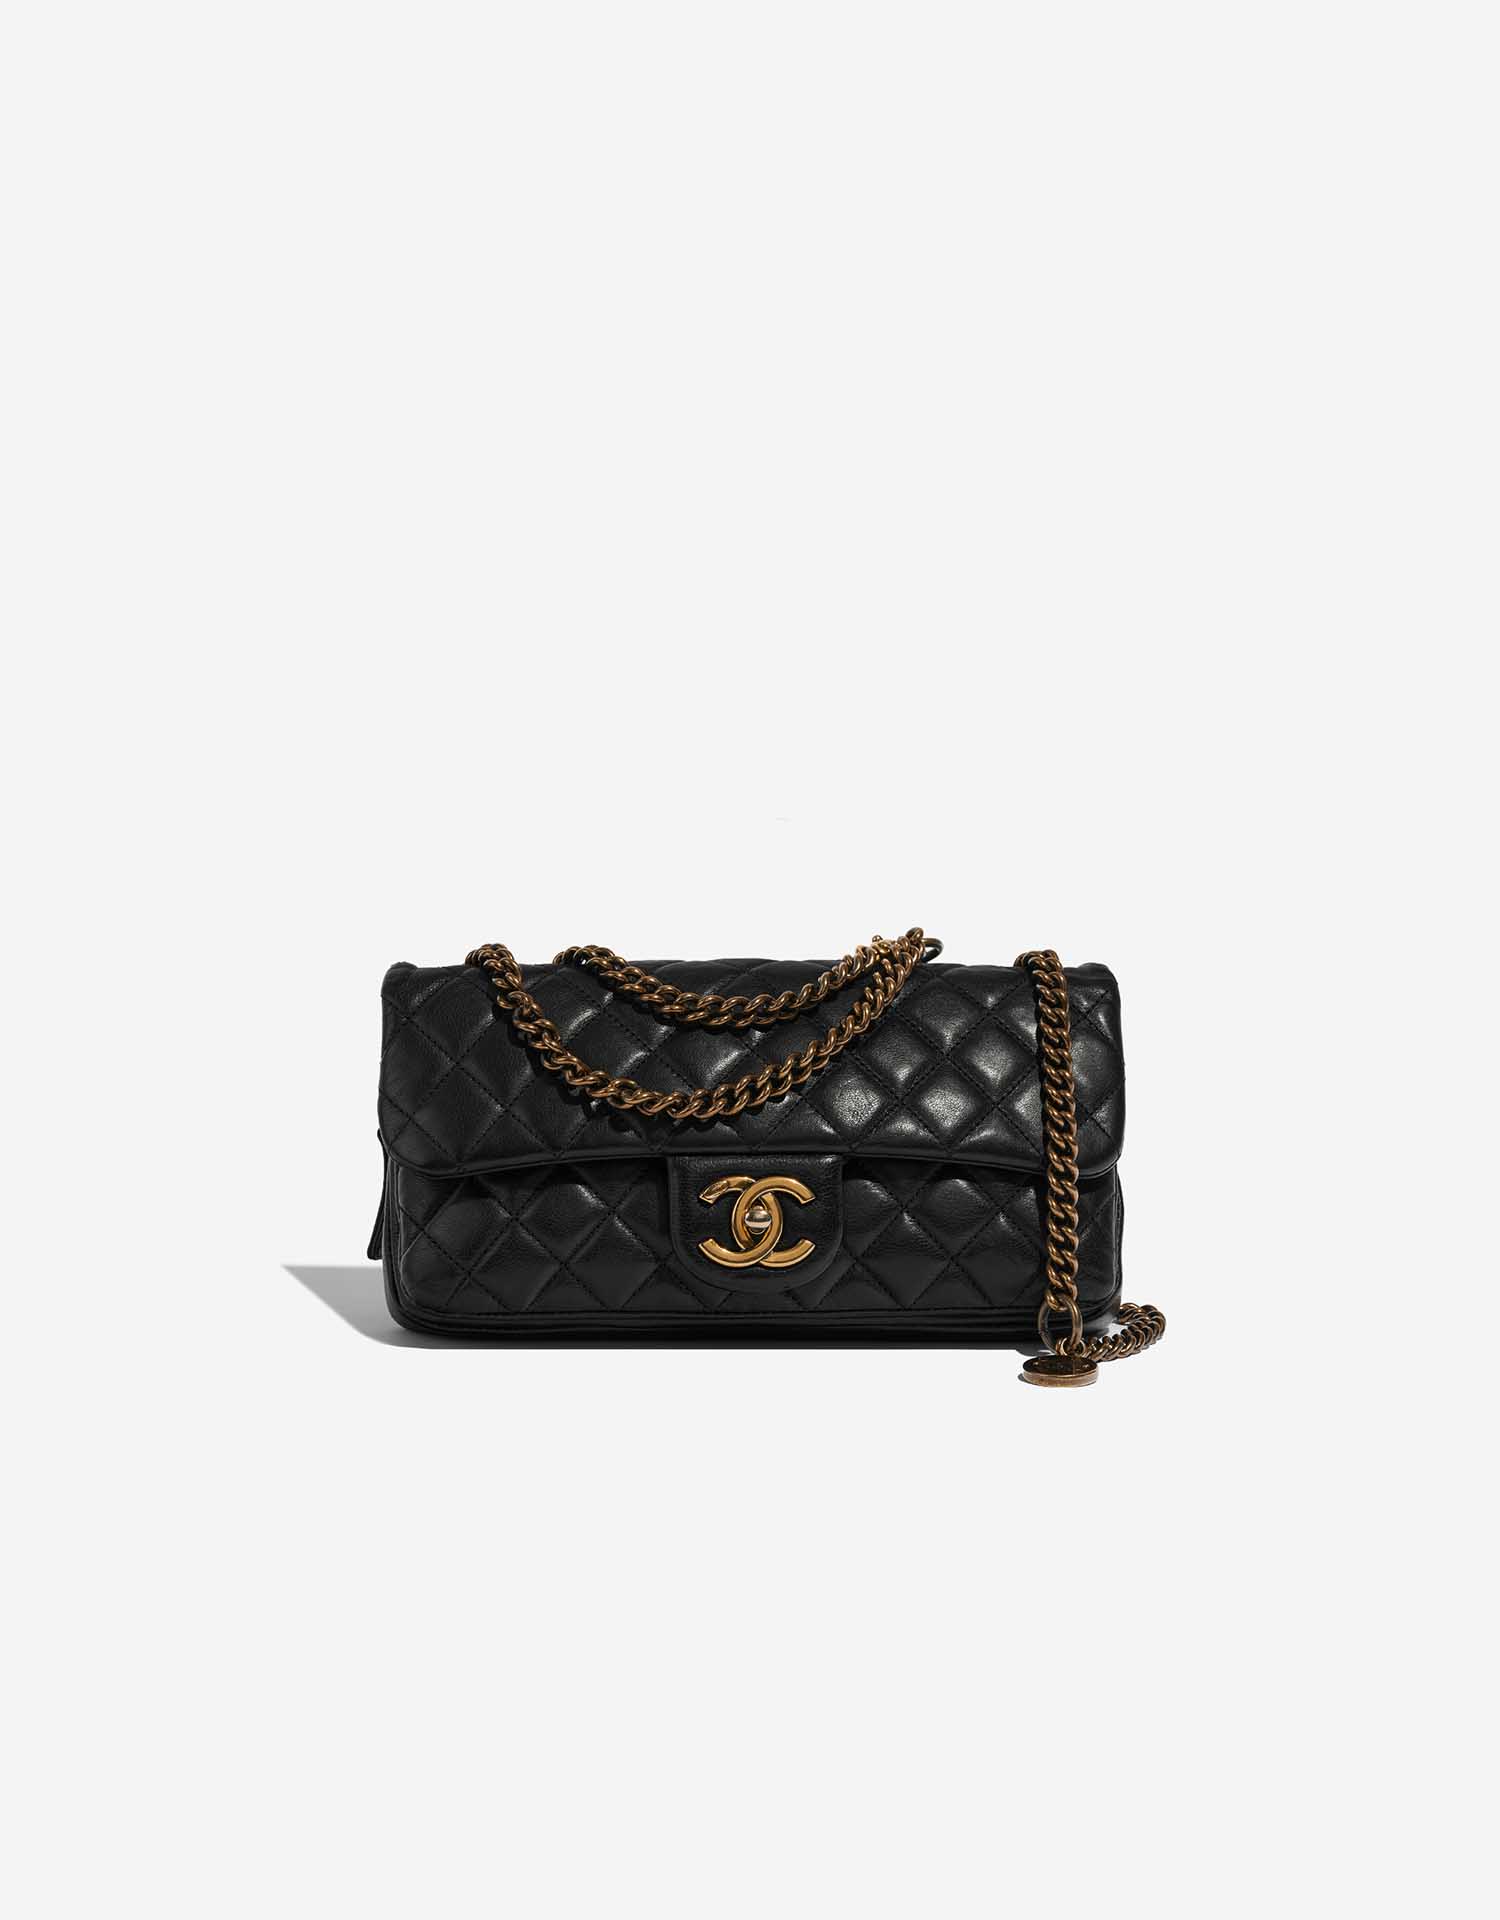 Chanel Black Quilted Leather Frame Clutch with Chain Bag - Yoogi's Closet